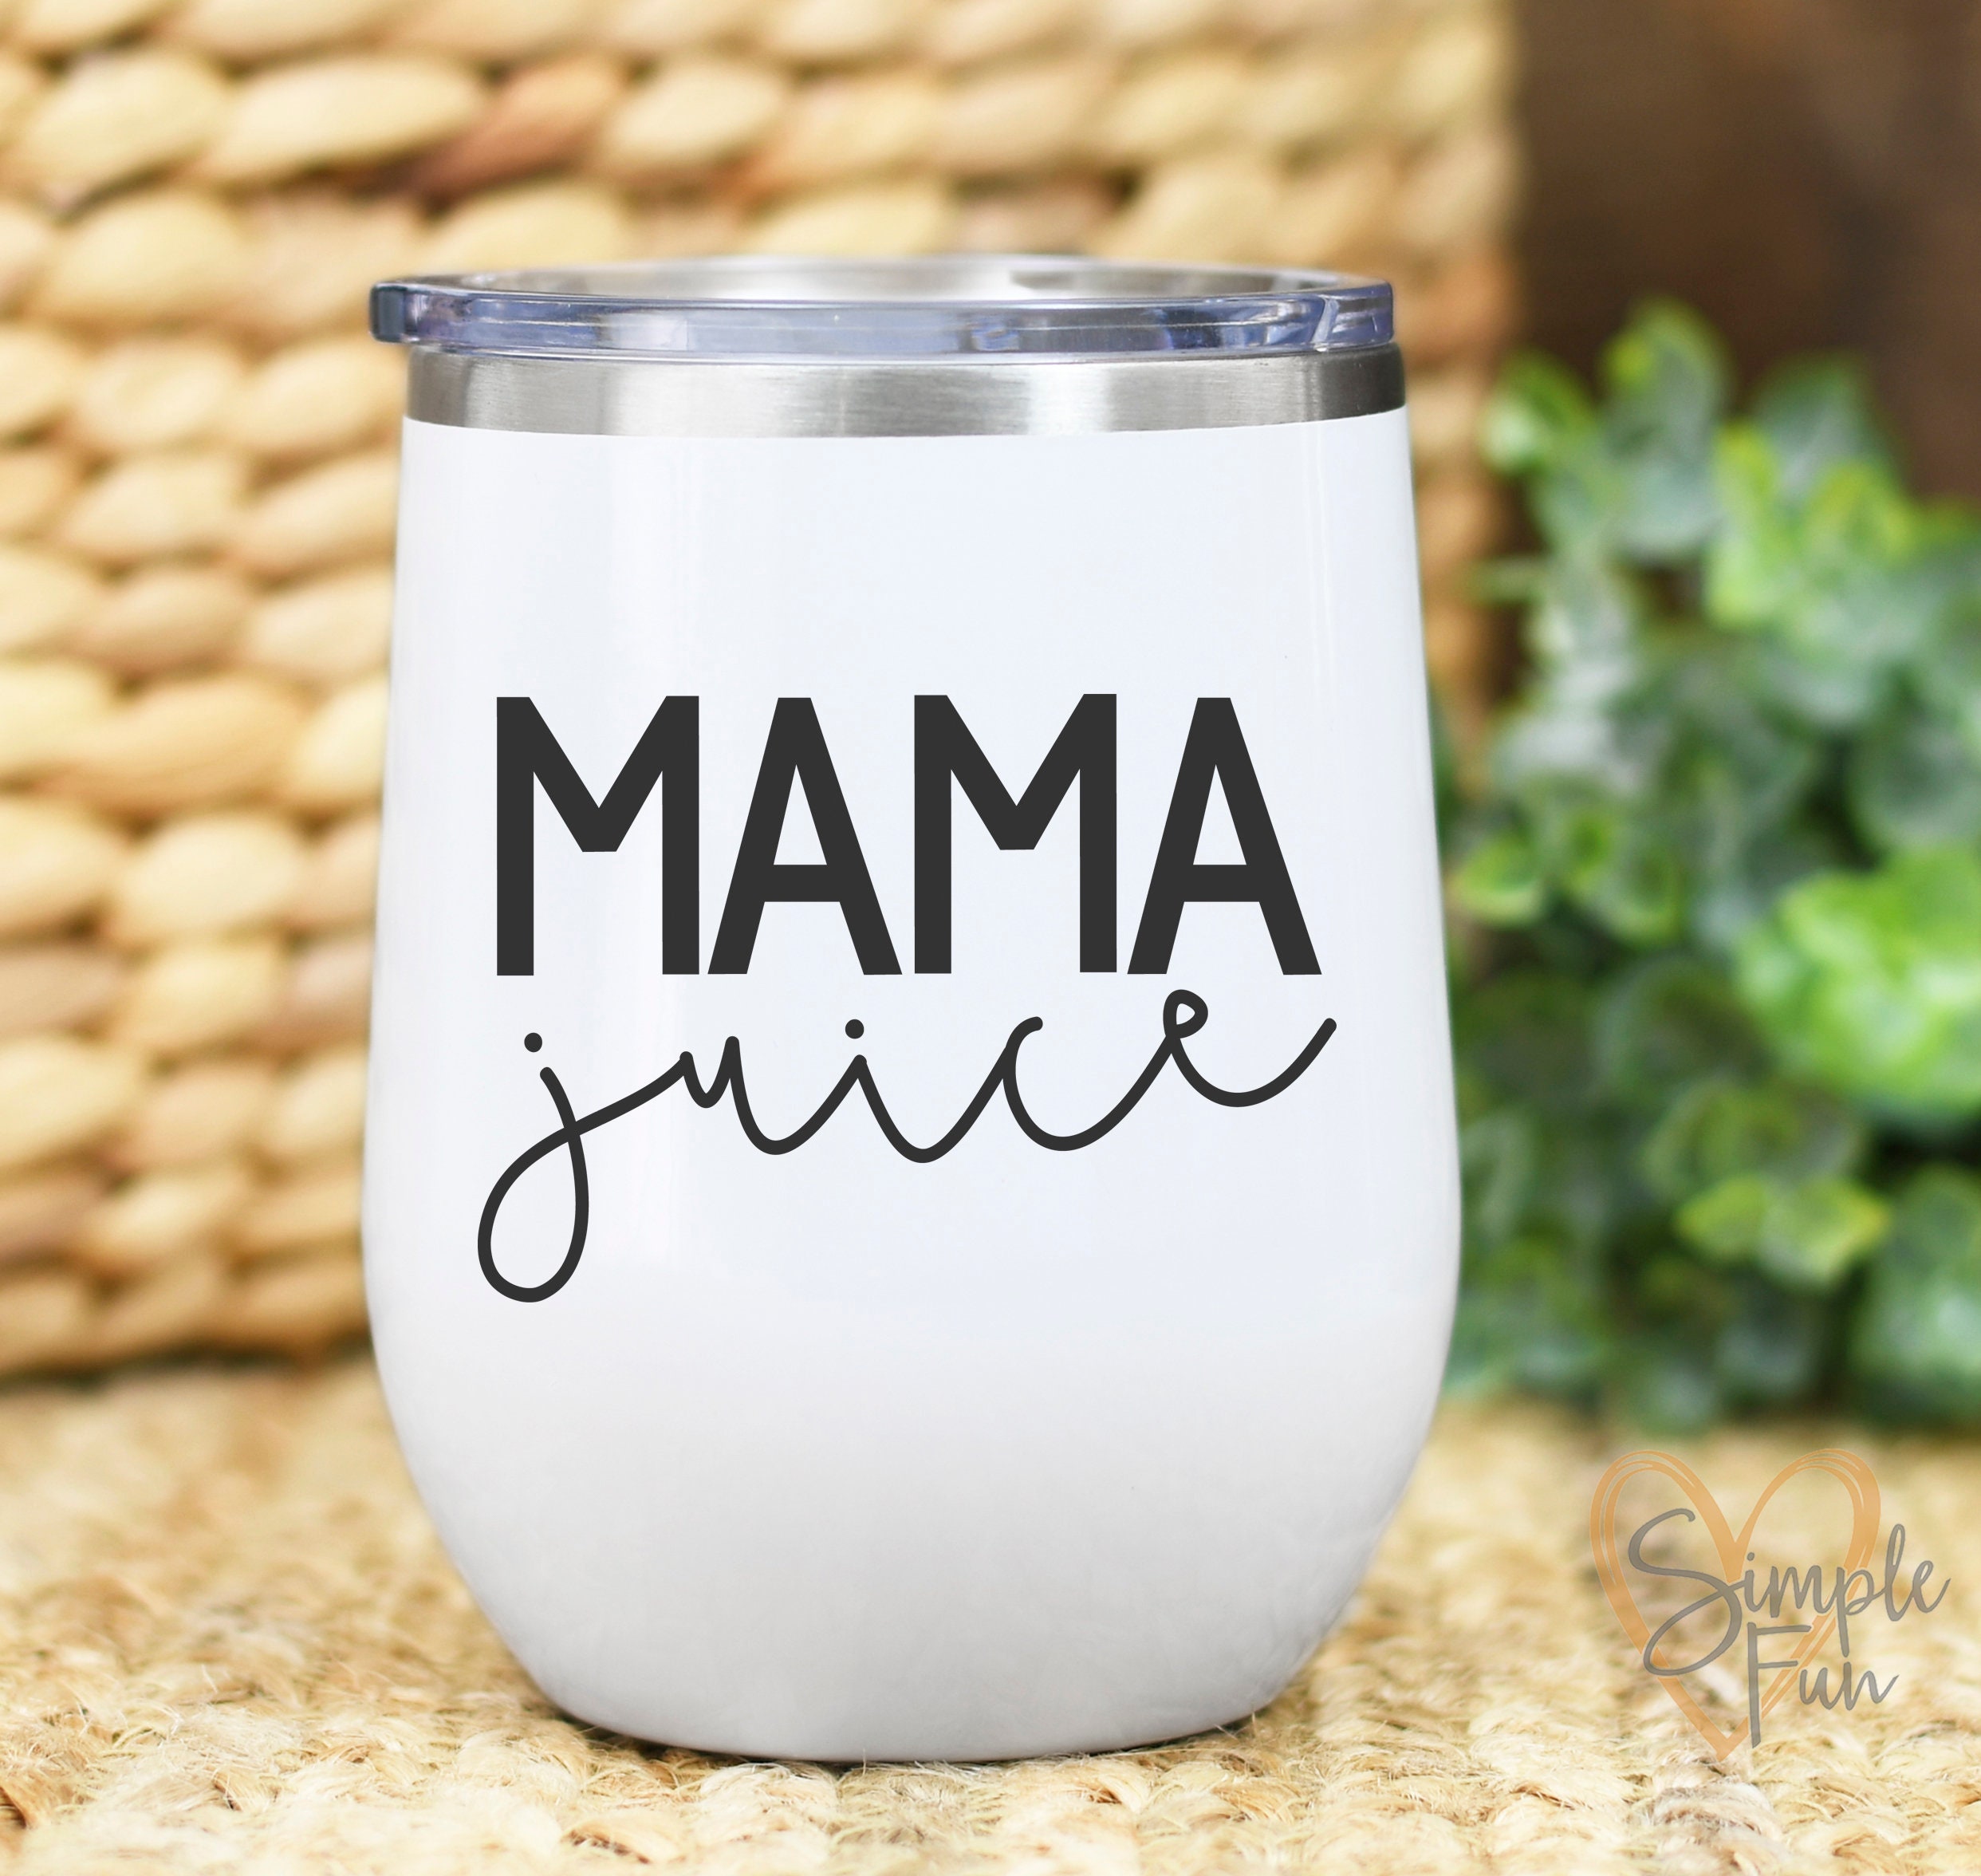 Mommy Juice Glass Can – Cups 4 Cuties